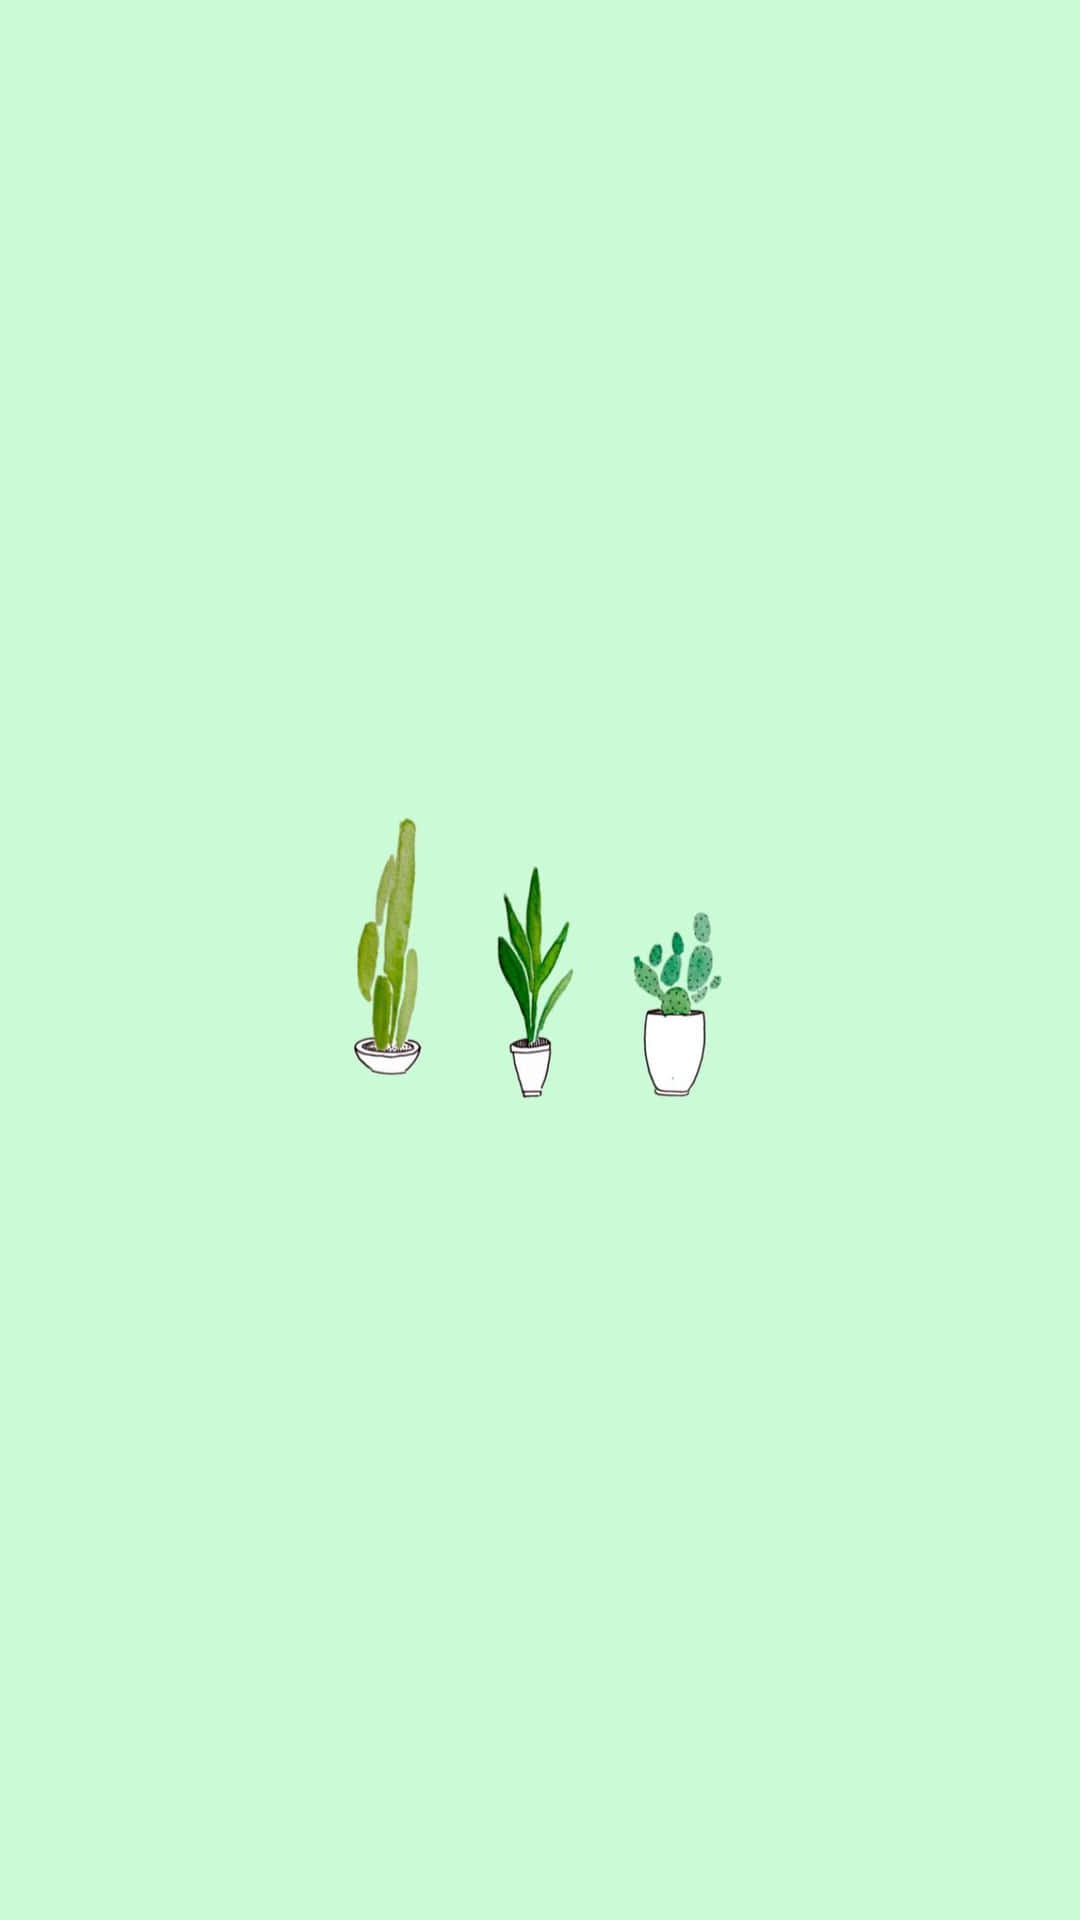 A Green Background With Three Cactus Plants On It Wallpaper